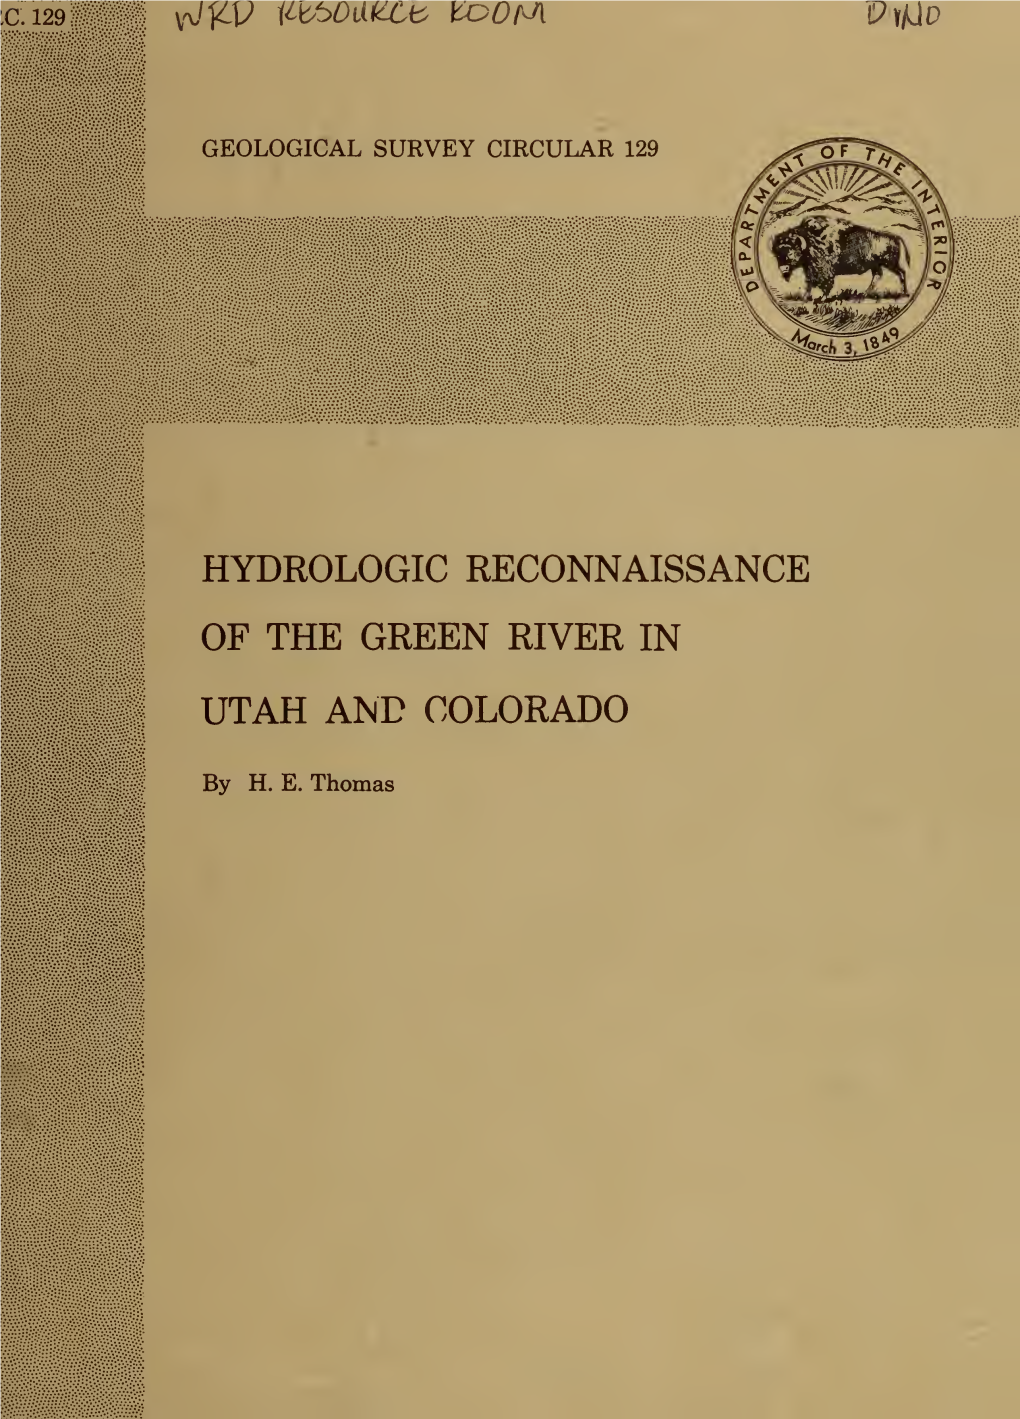 Hydrologic Reconnaissance of the Green River in Utah and Colorado